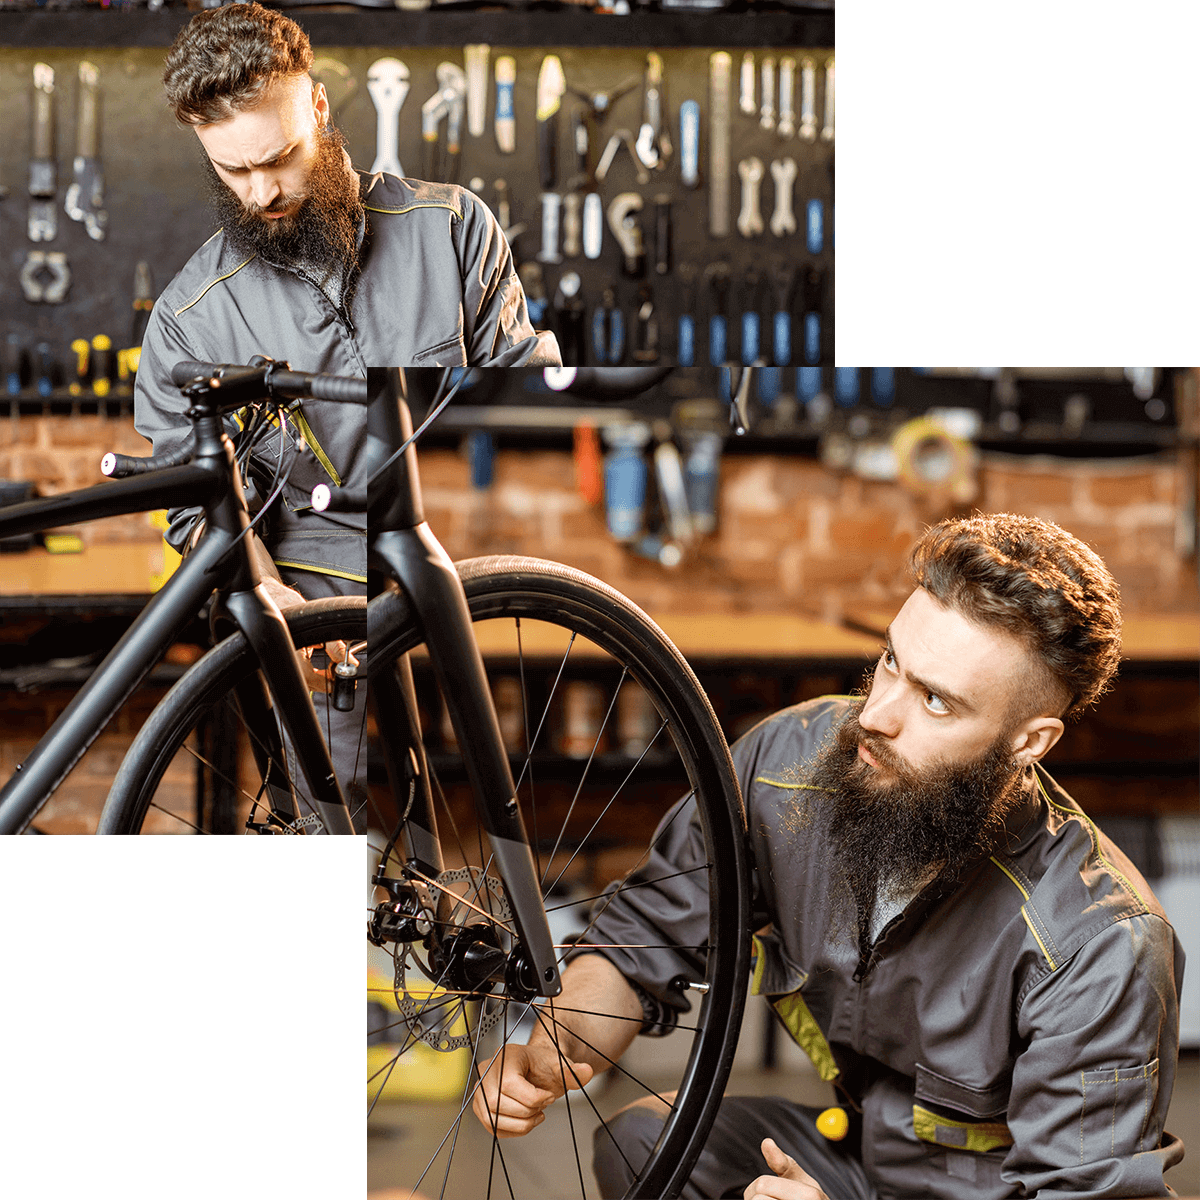 A man at a bicycle repair shop is checking the condition of a bike.